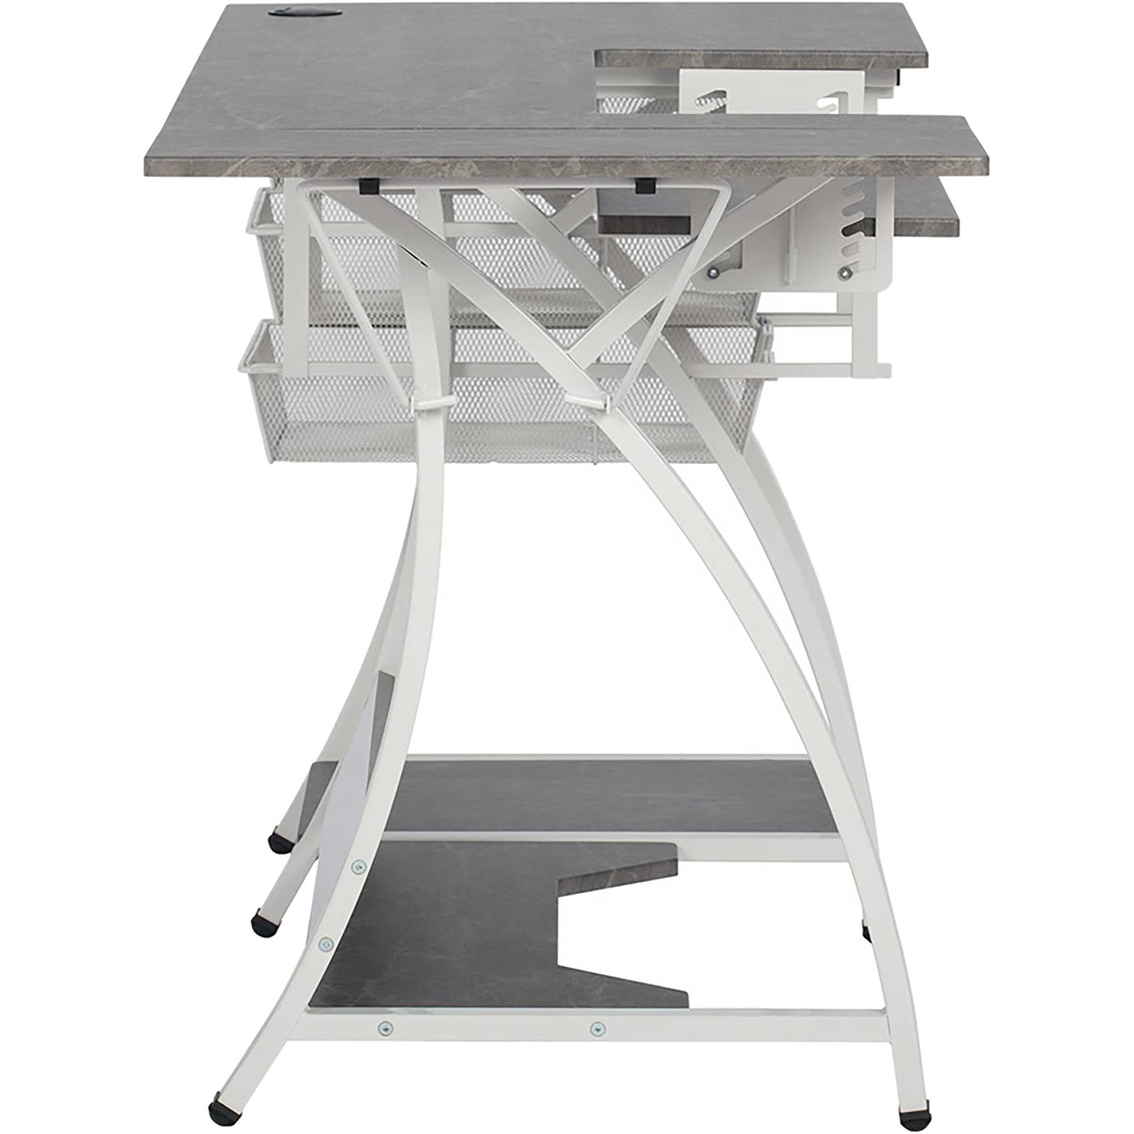 Sew Ready Pro Stitch Sewing Table - Image 3 of 8